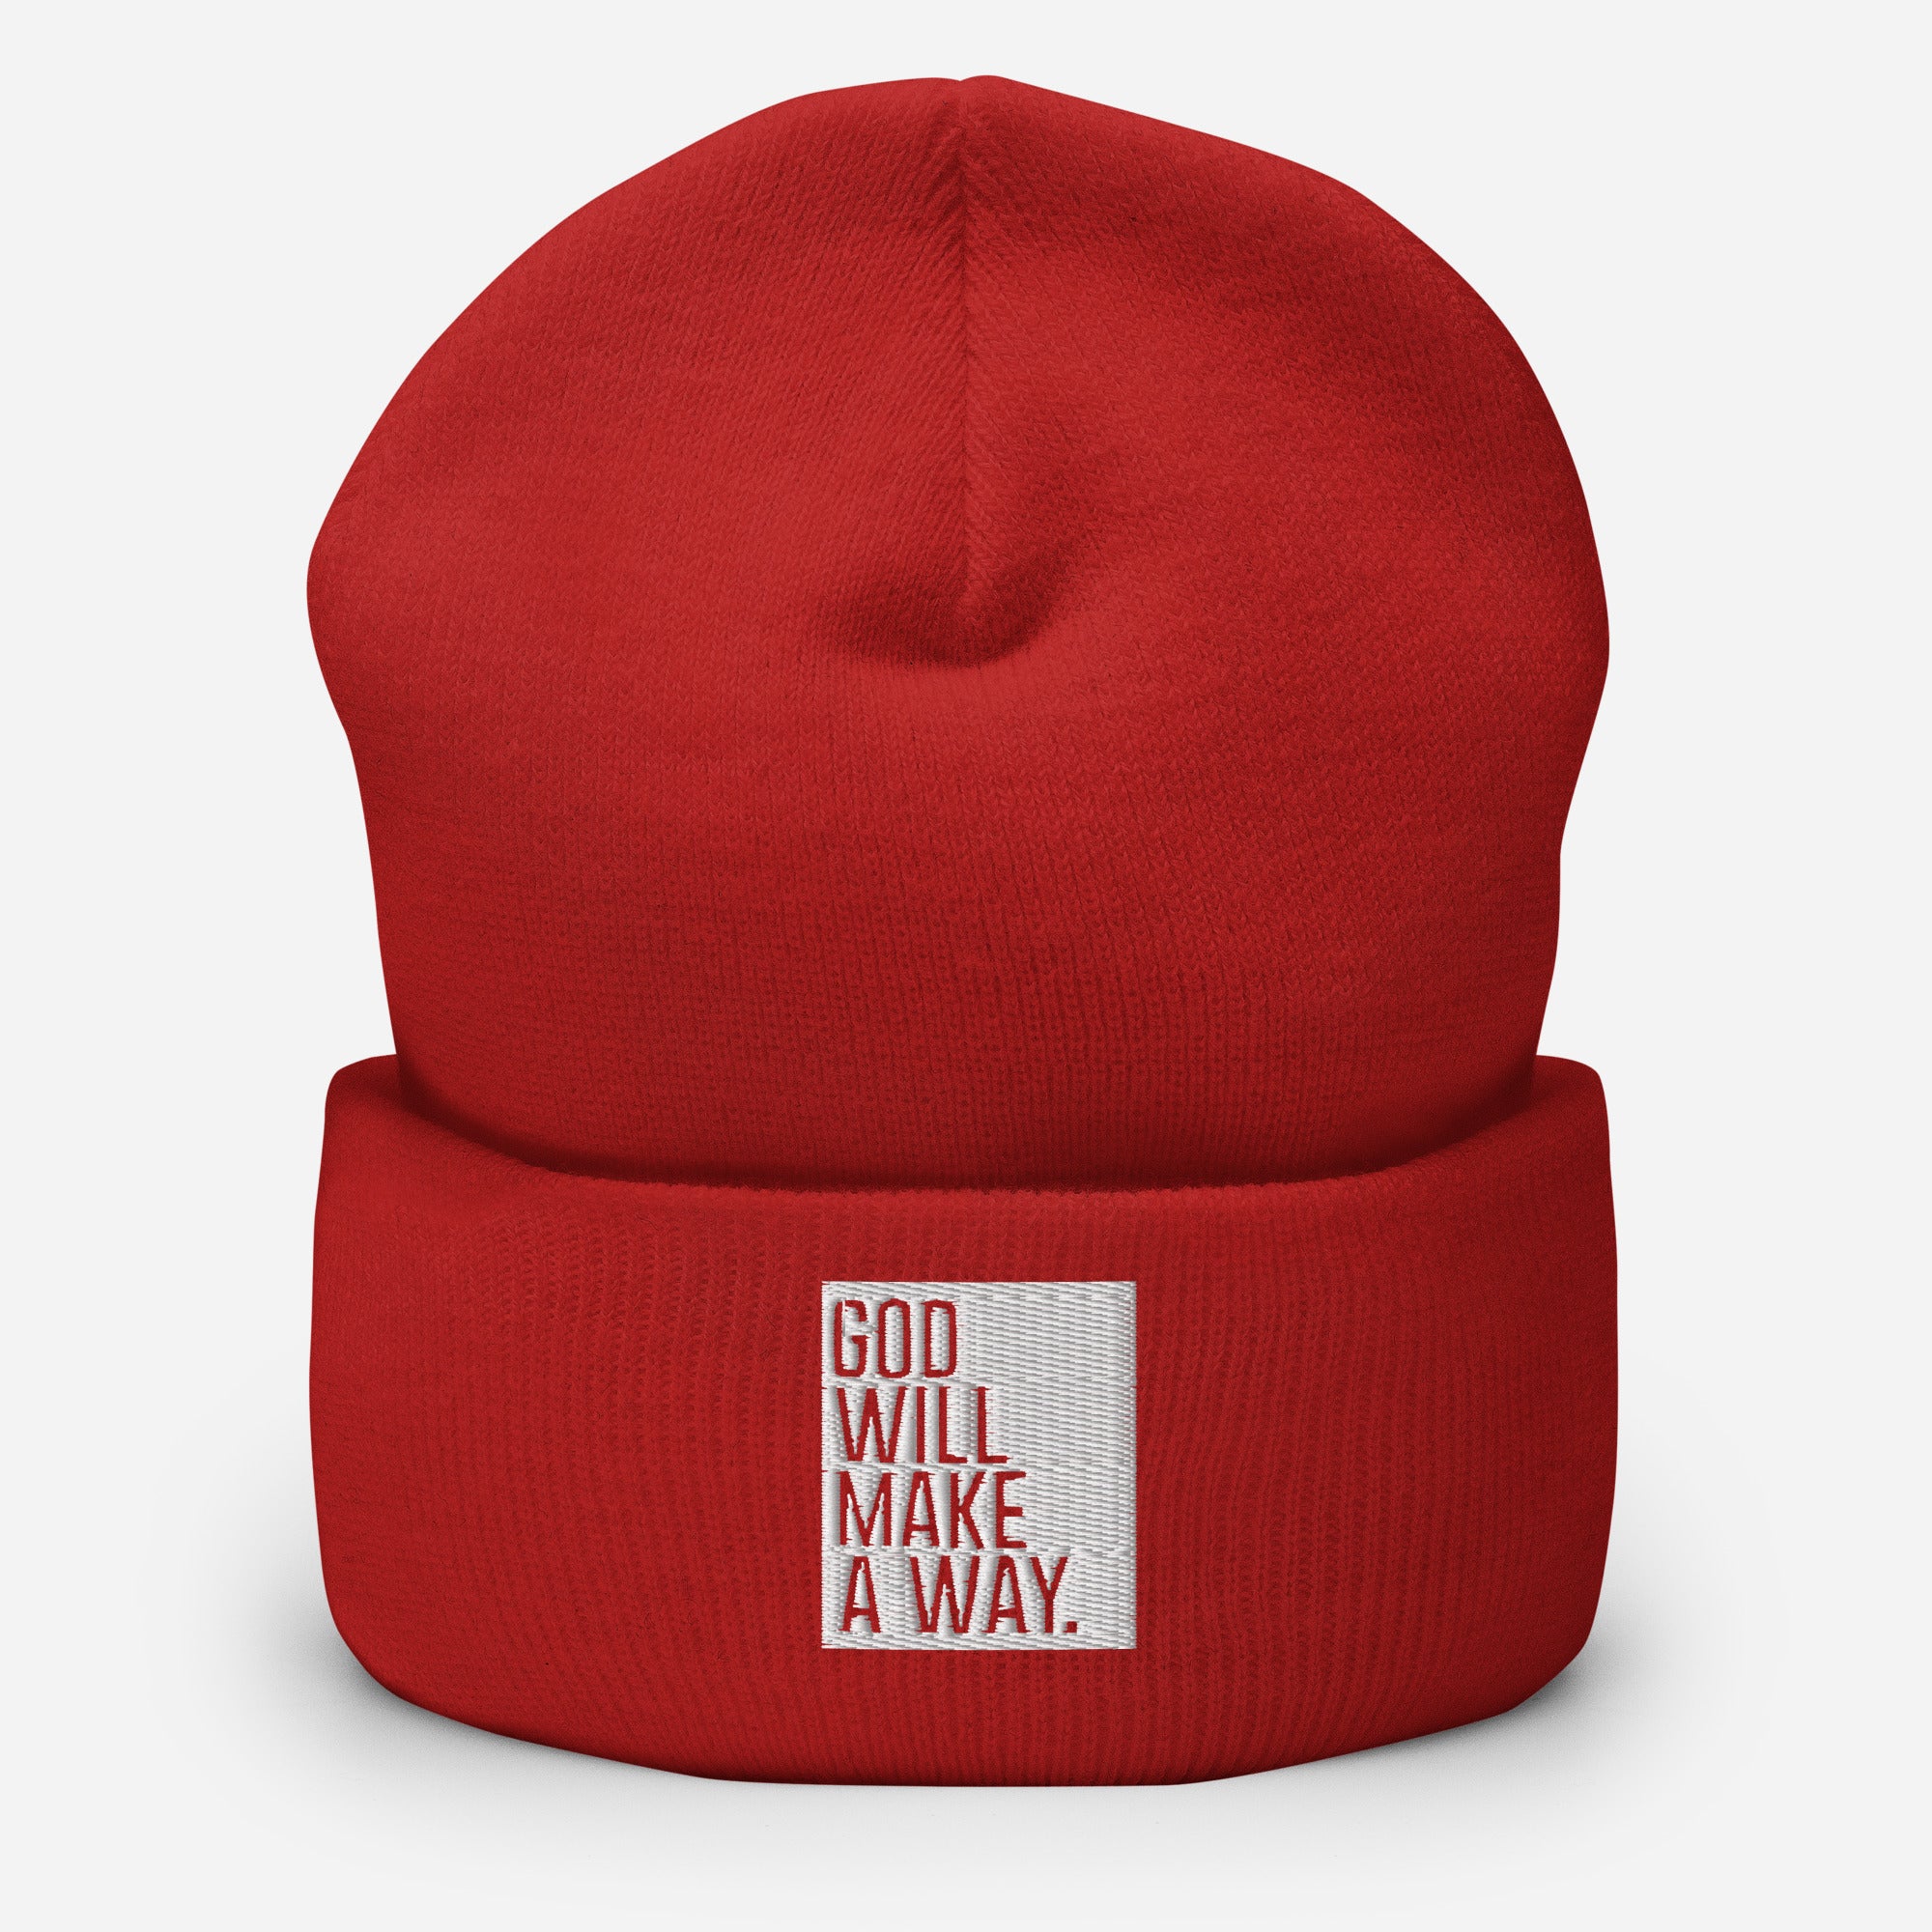 God Will Make A Way Beanie, Used By God, Used By God Clothing, Christian Apparel, Christian Hats, Christian T-Shirts, Christian Clothing, God Shirts, Christian Sweatshirts, God Clothing, Jesus Hoodie, Jesus Clothes, God Is Dope, Art Of Homage, Red Letter Clothing, Elevated Faith, Active Faith Sports, Beacon Threads, God The Father Apparel